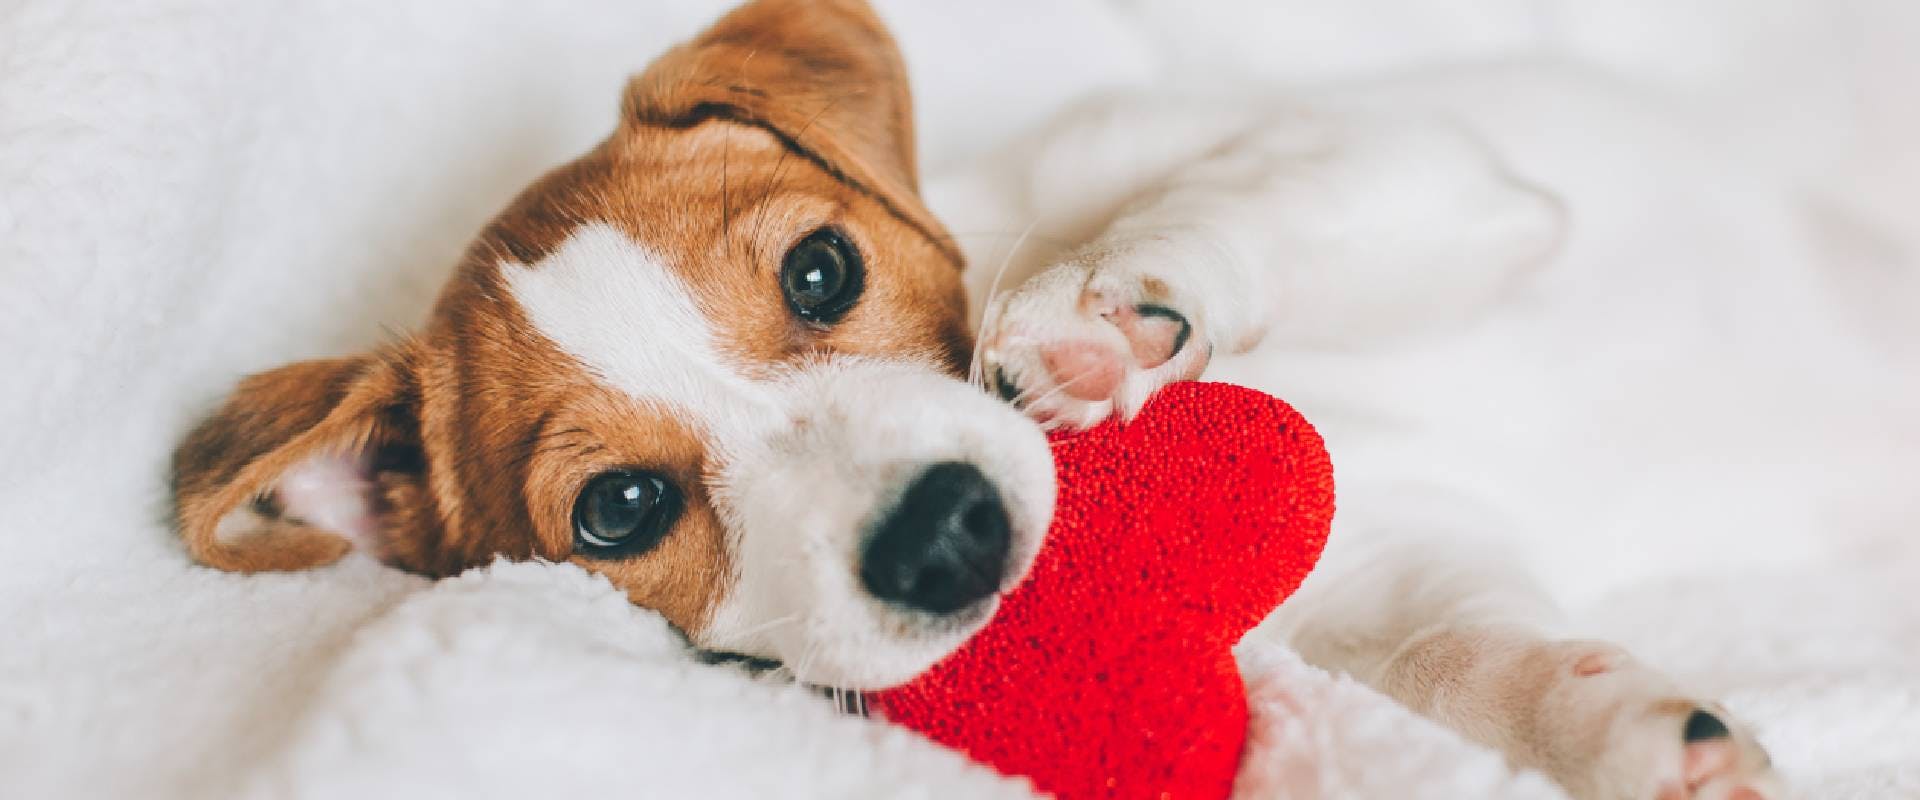 Jack Russell puppy holding a heart-shaped toy